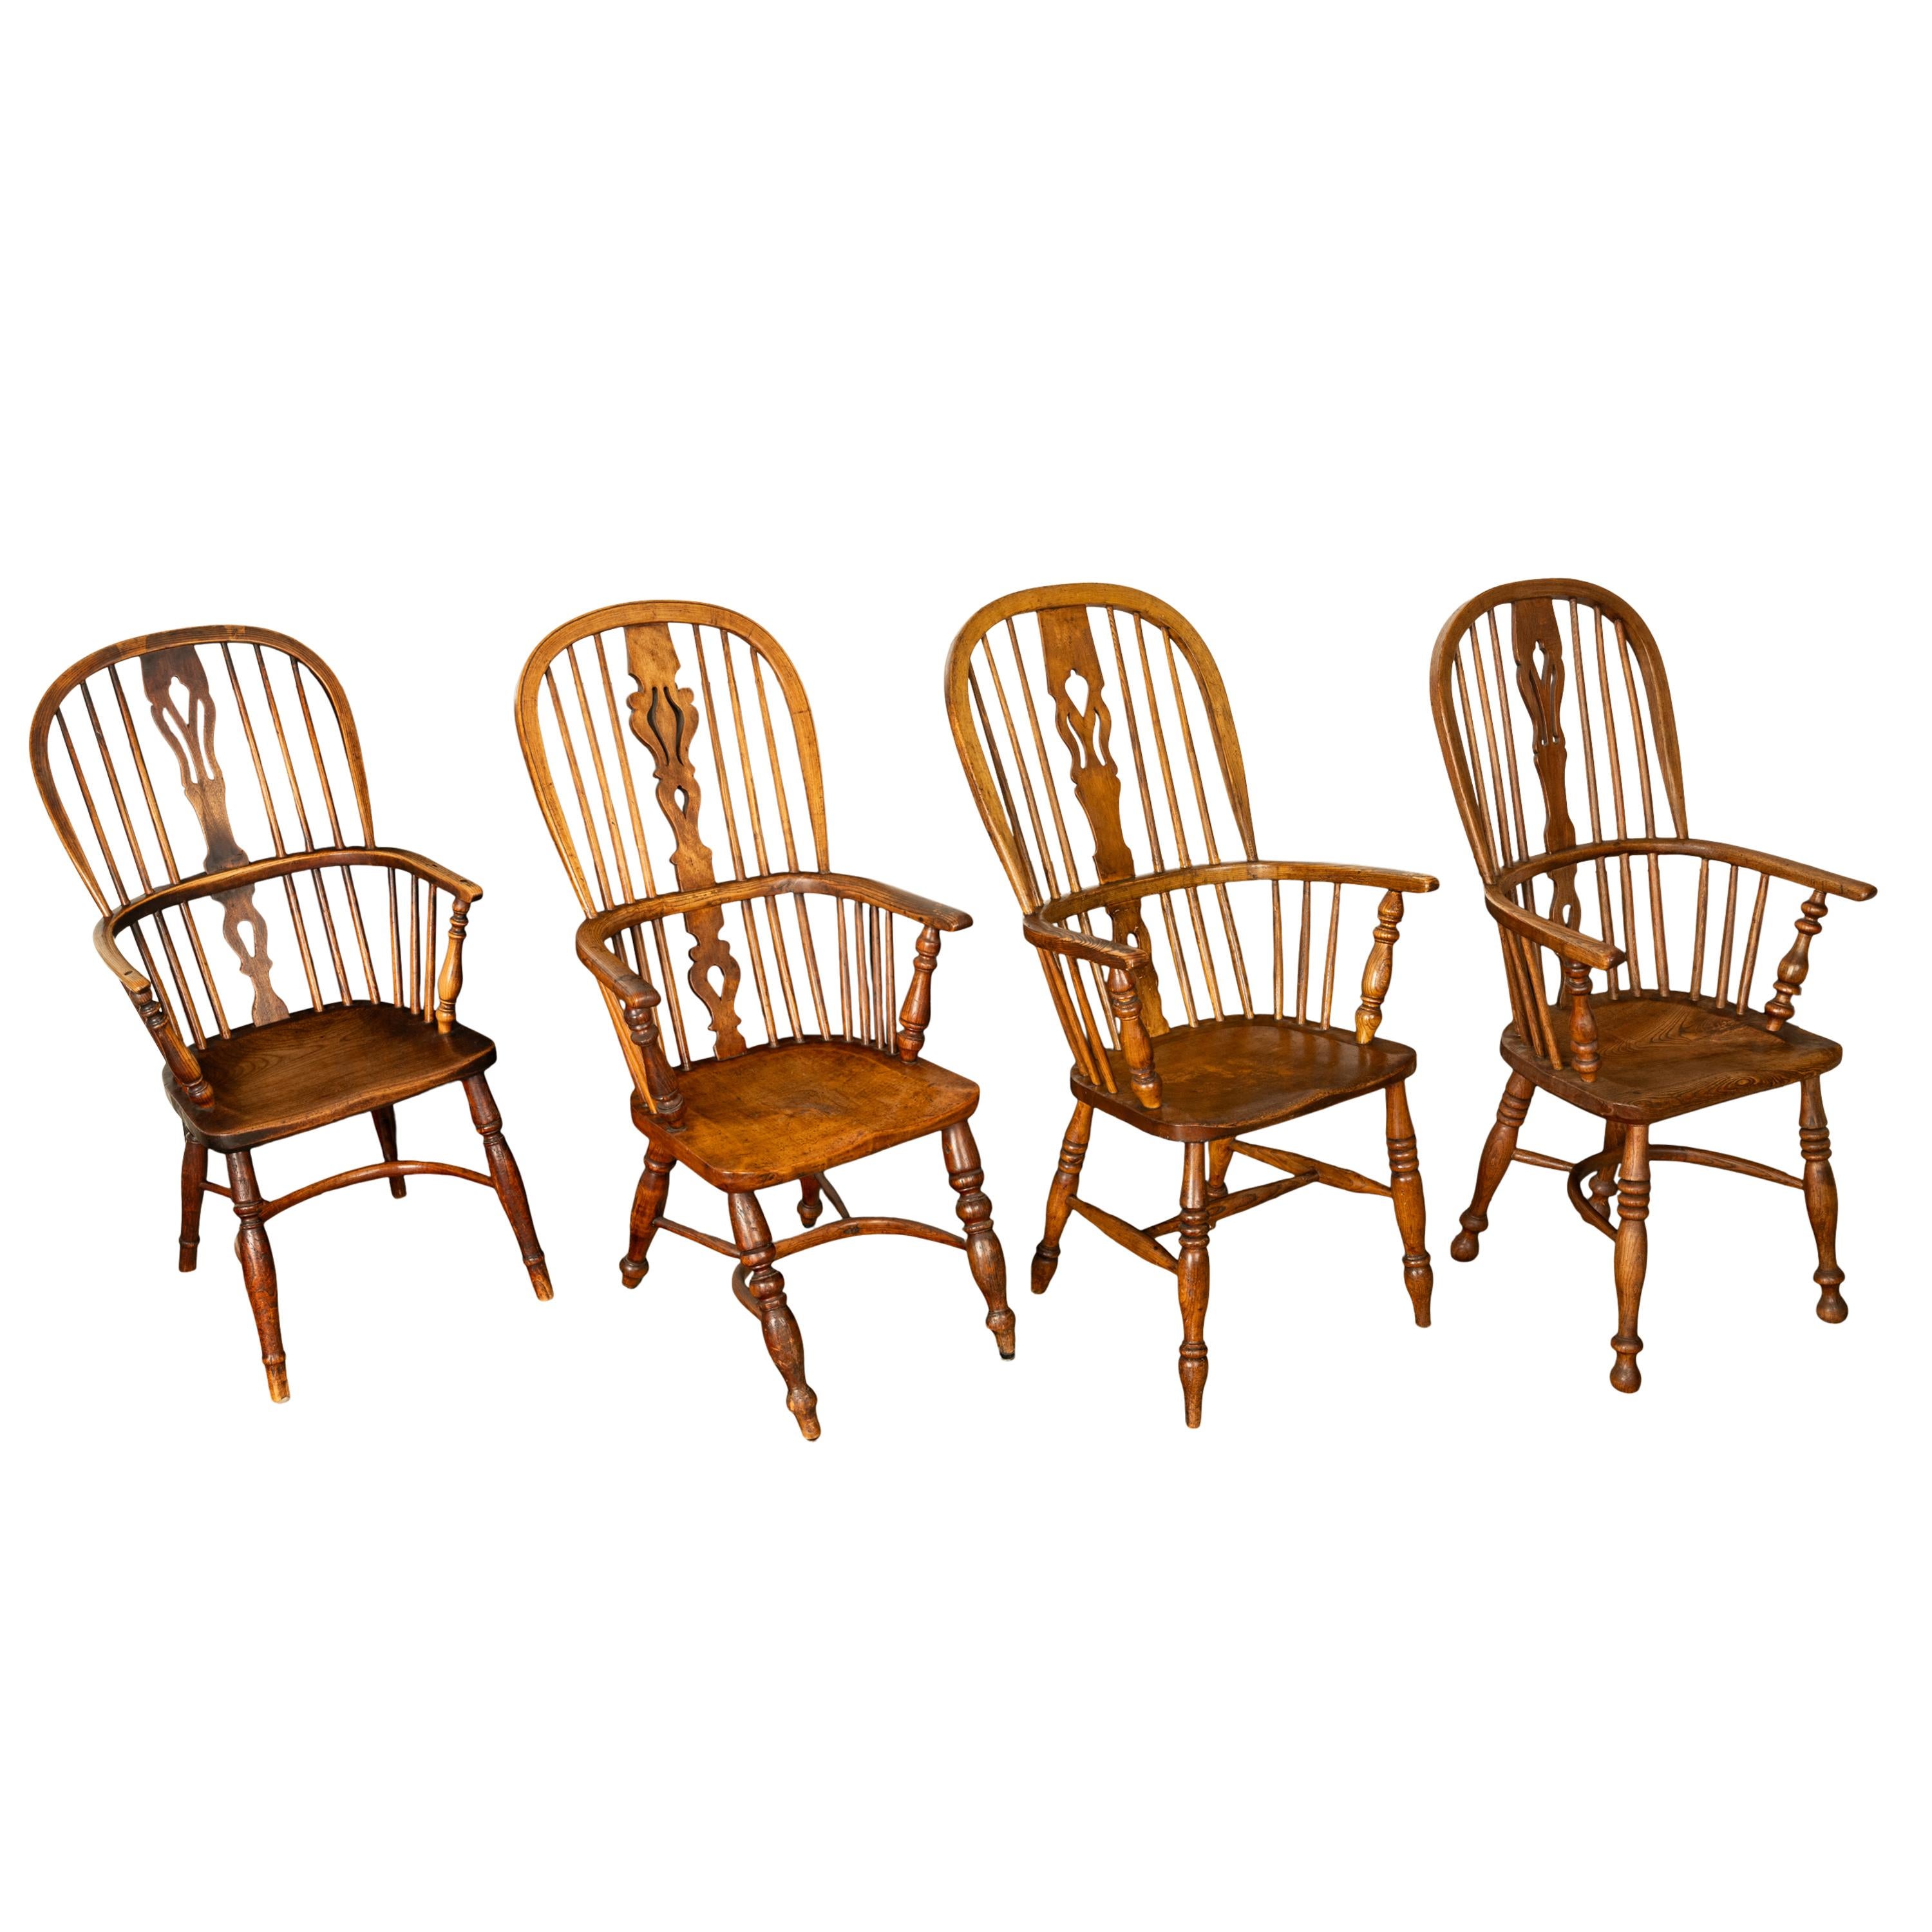 Set 4 Antique 19thC High-backed English Ash Elm Country Windsor Arm Chairs 1840  For Sale 7